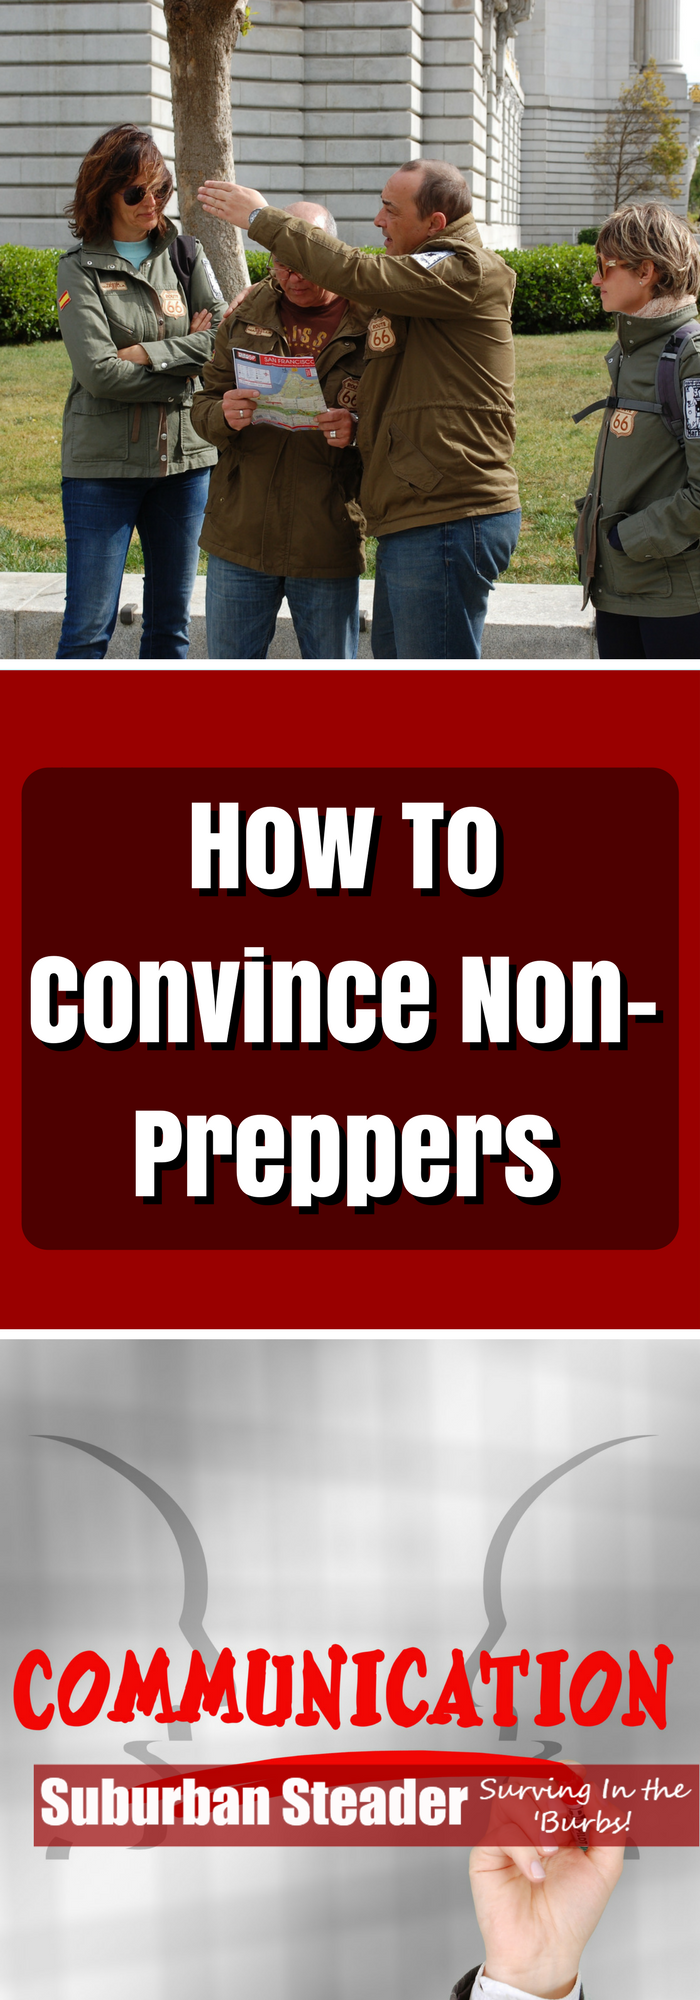 How To Convince Non-Preppers